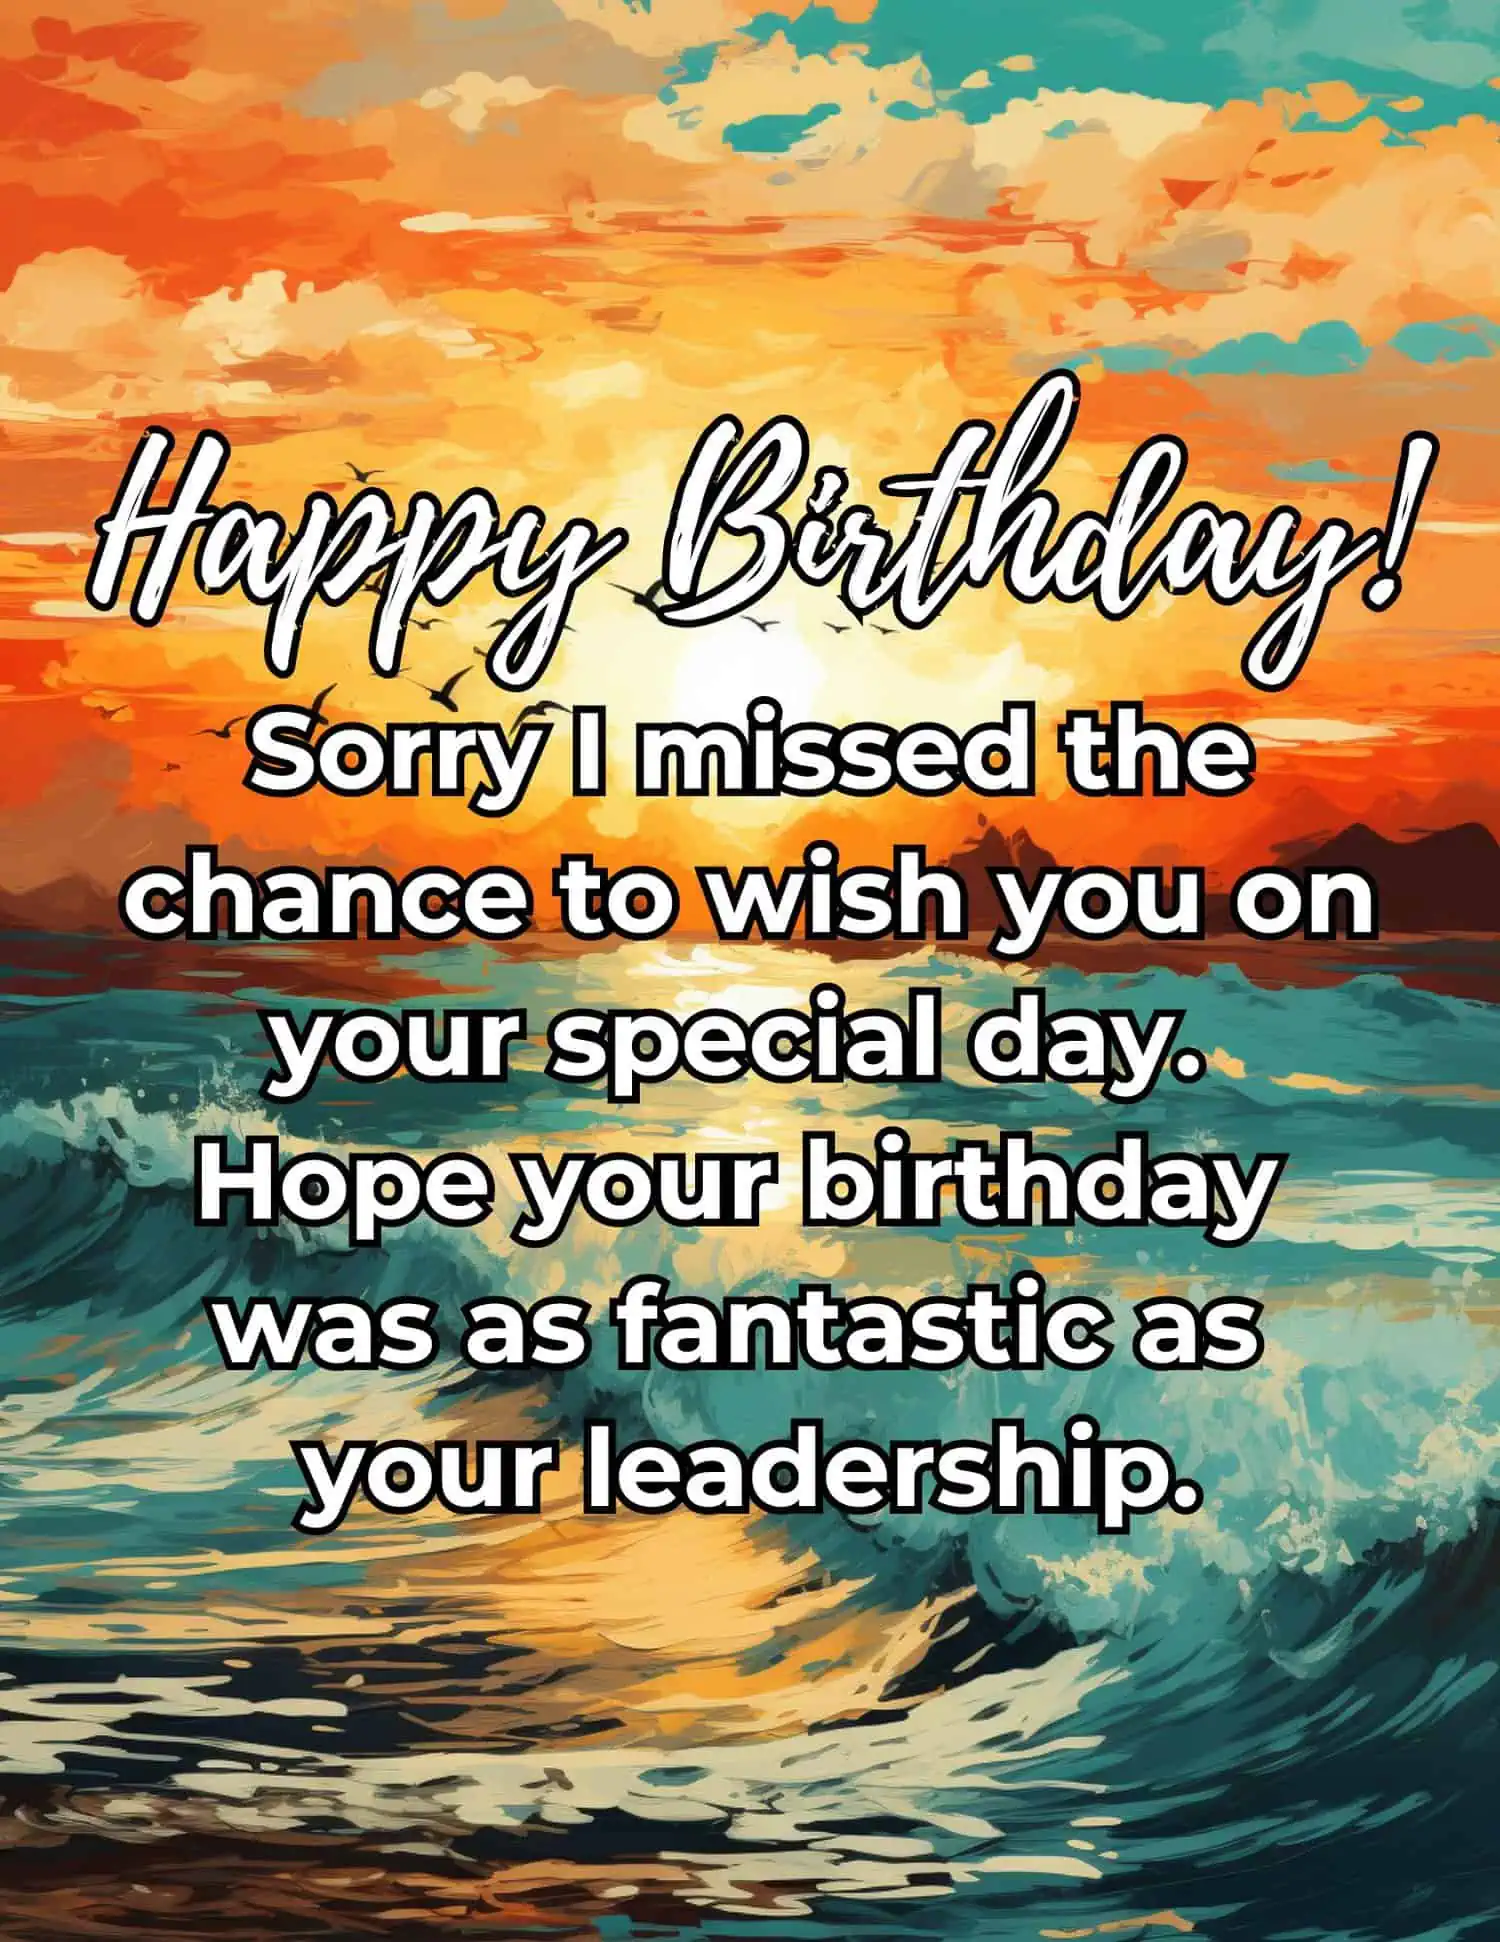 A collection of considerate and respectful belated birthday wishes for your boss, perfect for conveying your heartfelt greetings even after their actual birthday.